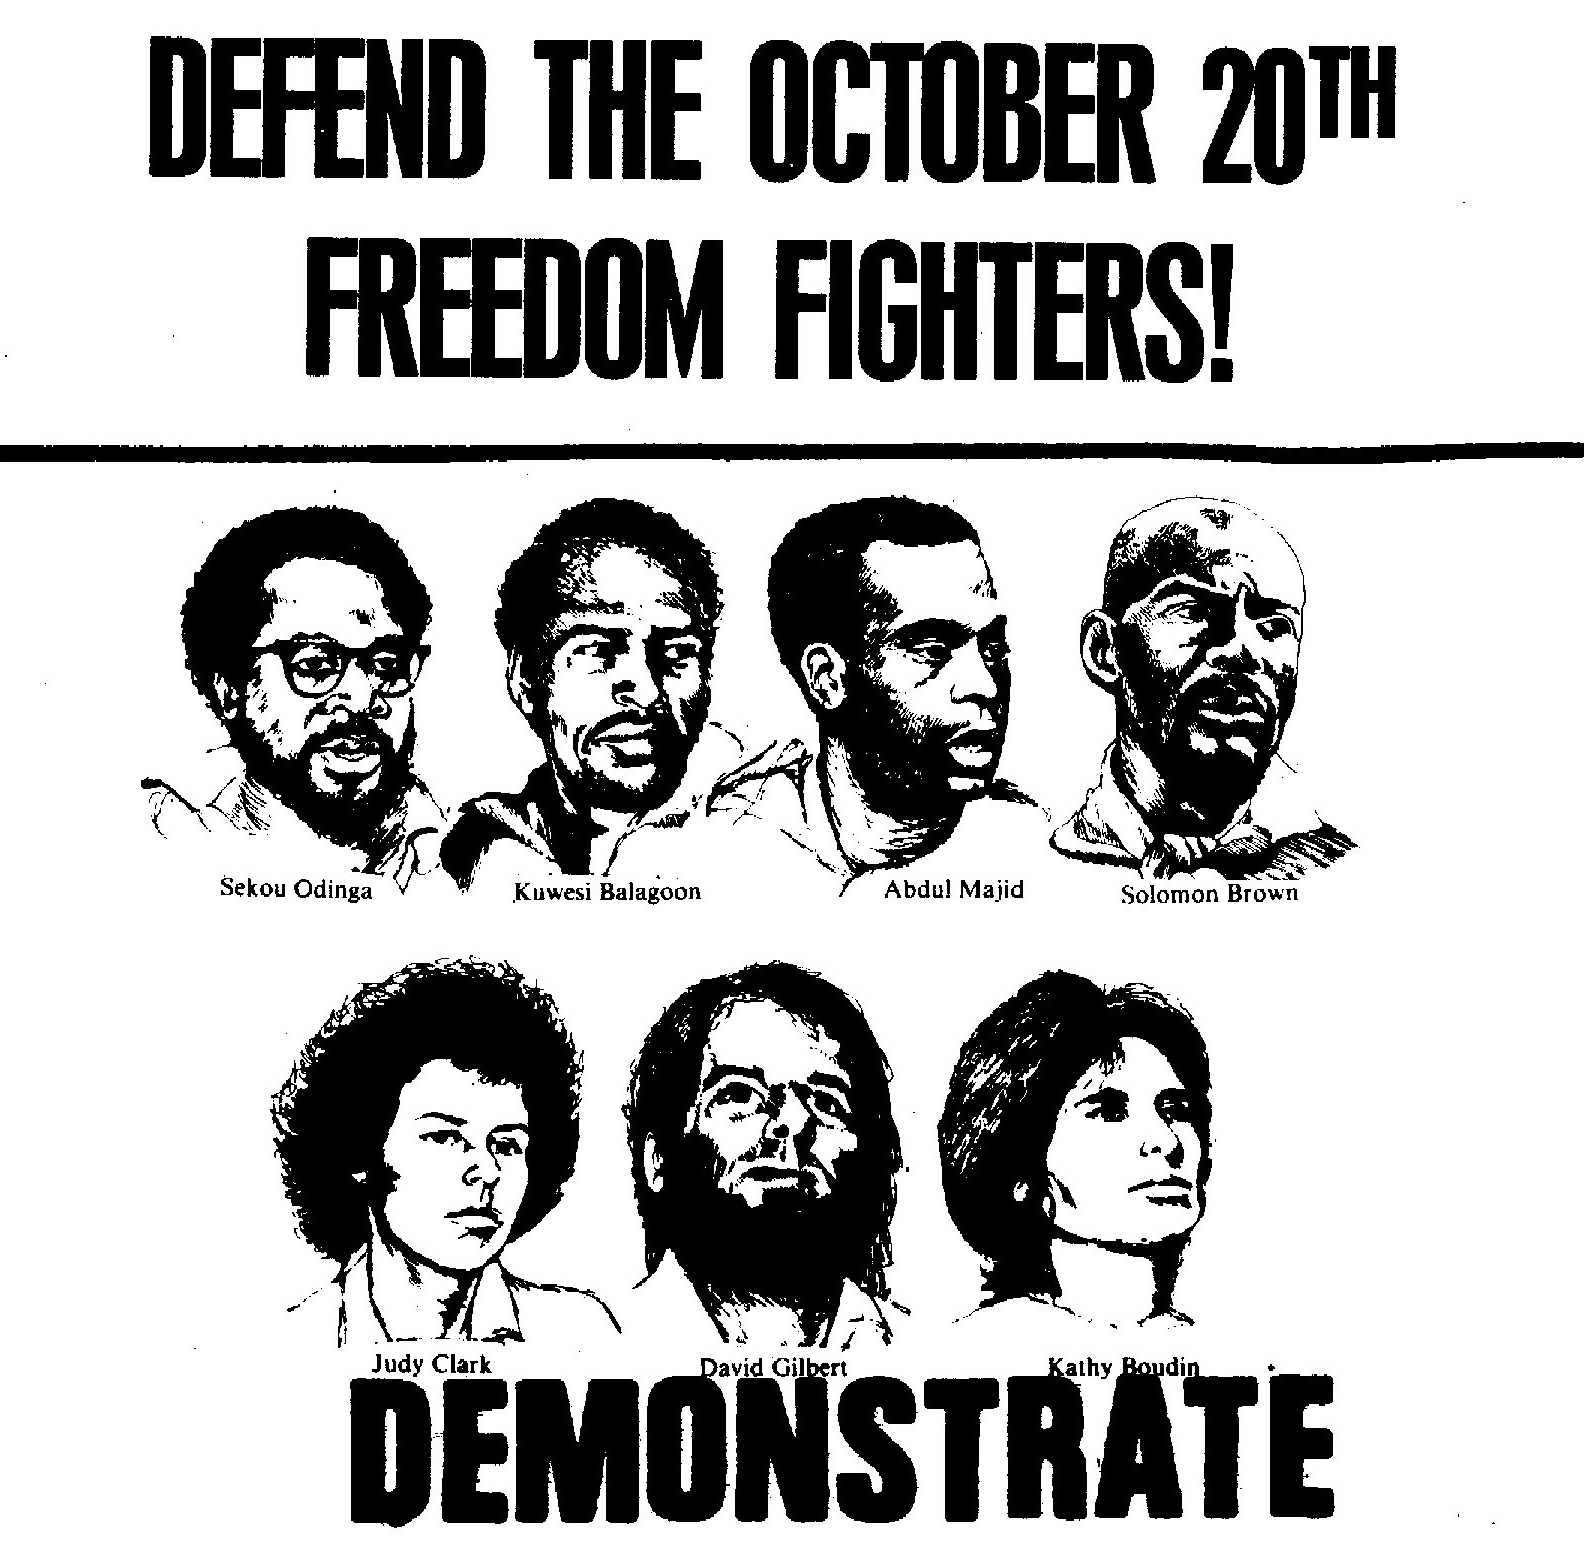 Coalition to Defend October 20th Freedom Fighters